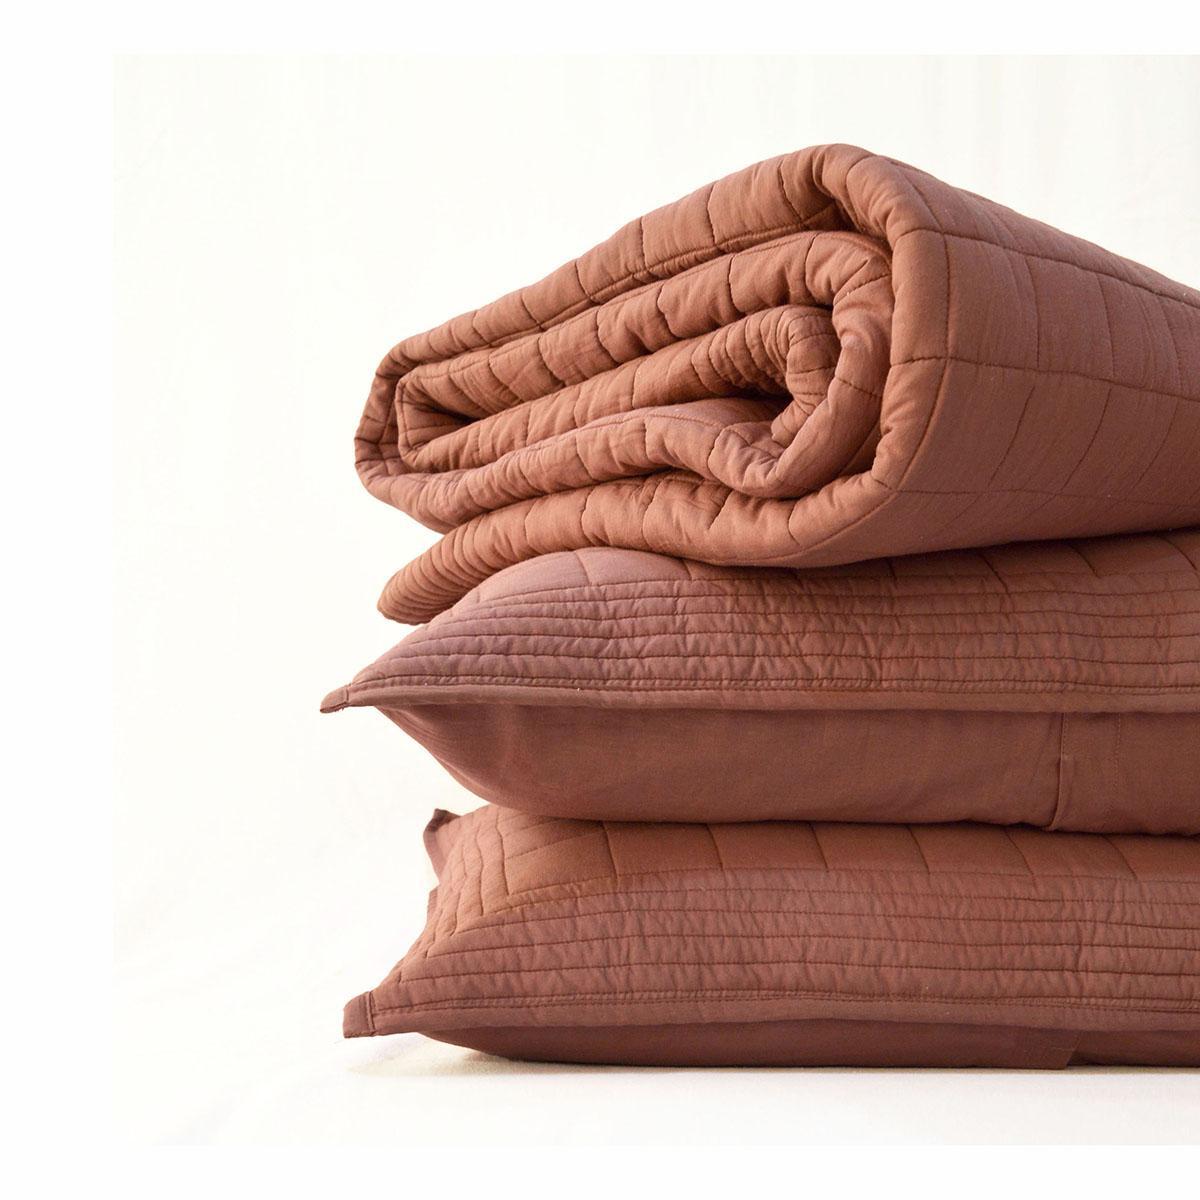 CLAY BROWN cotton Quilted - sets, quilts and pillow cases, Sizes available